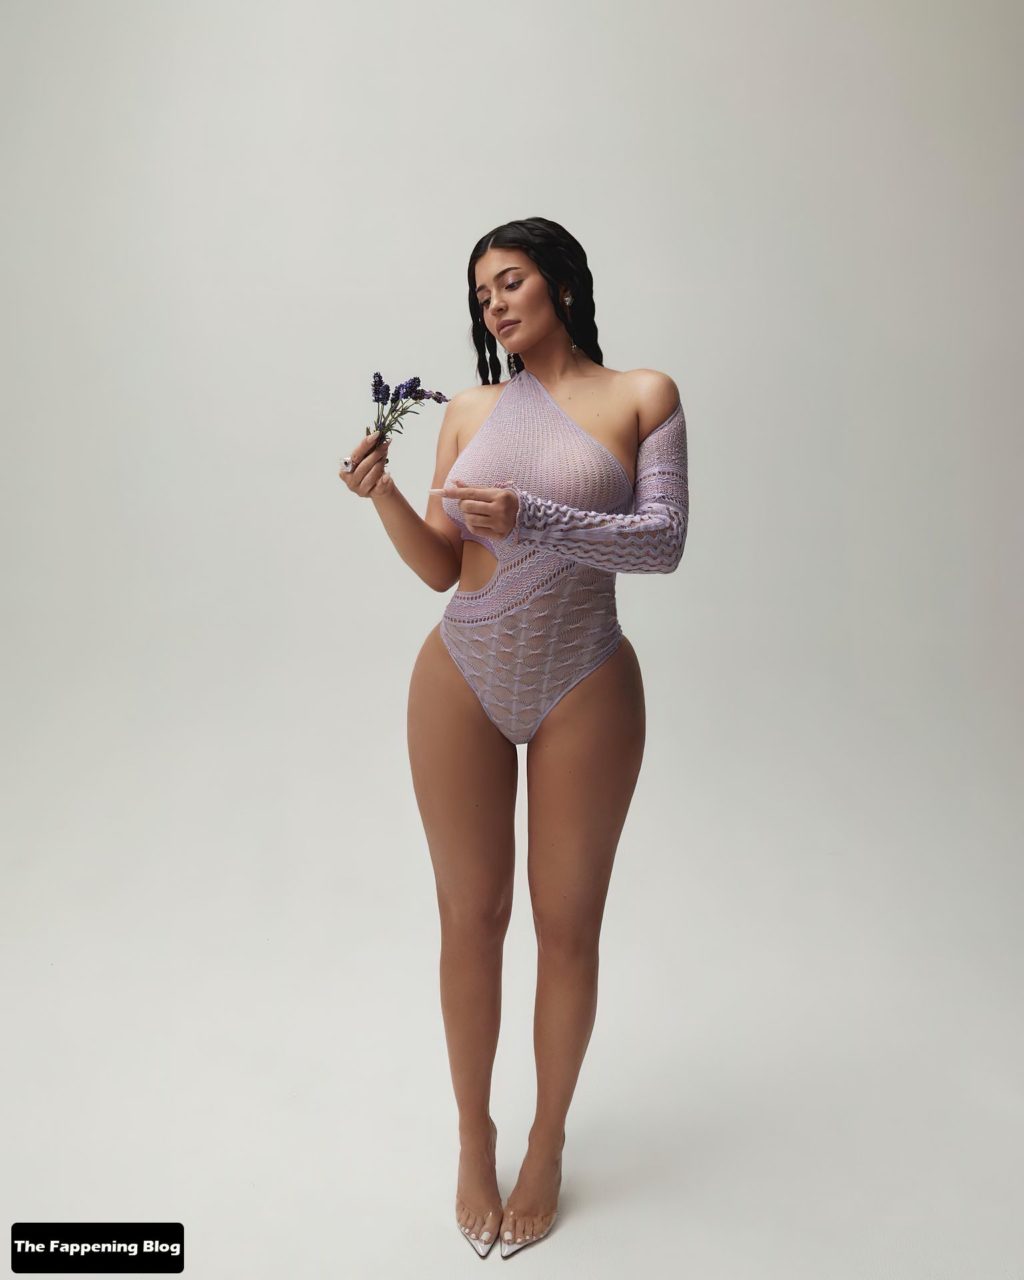 Kylie Jenner Sexy Curvy Body 23 1 thefappeningblog.com  1024x1280 - Kylie Jenner Sexy Collection (10 Photos)